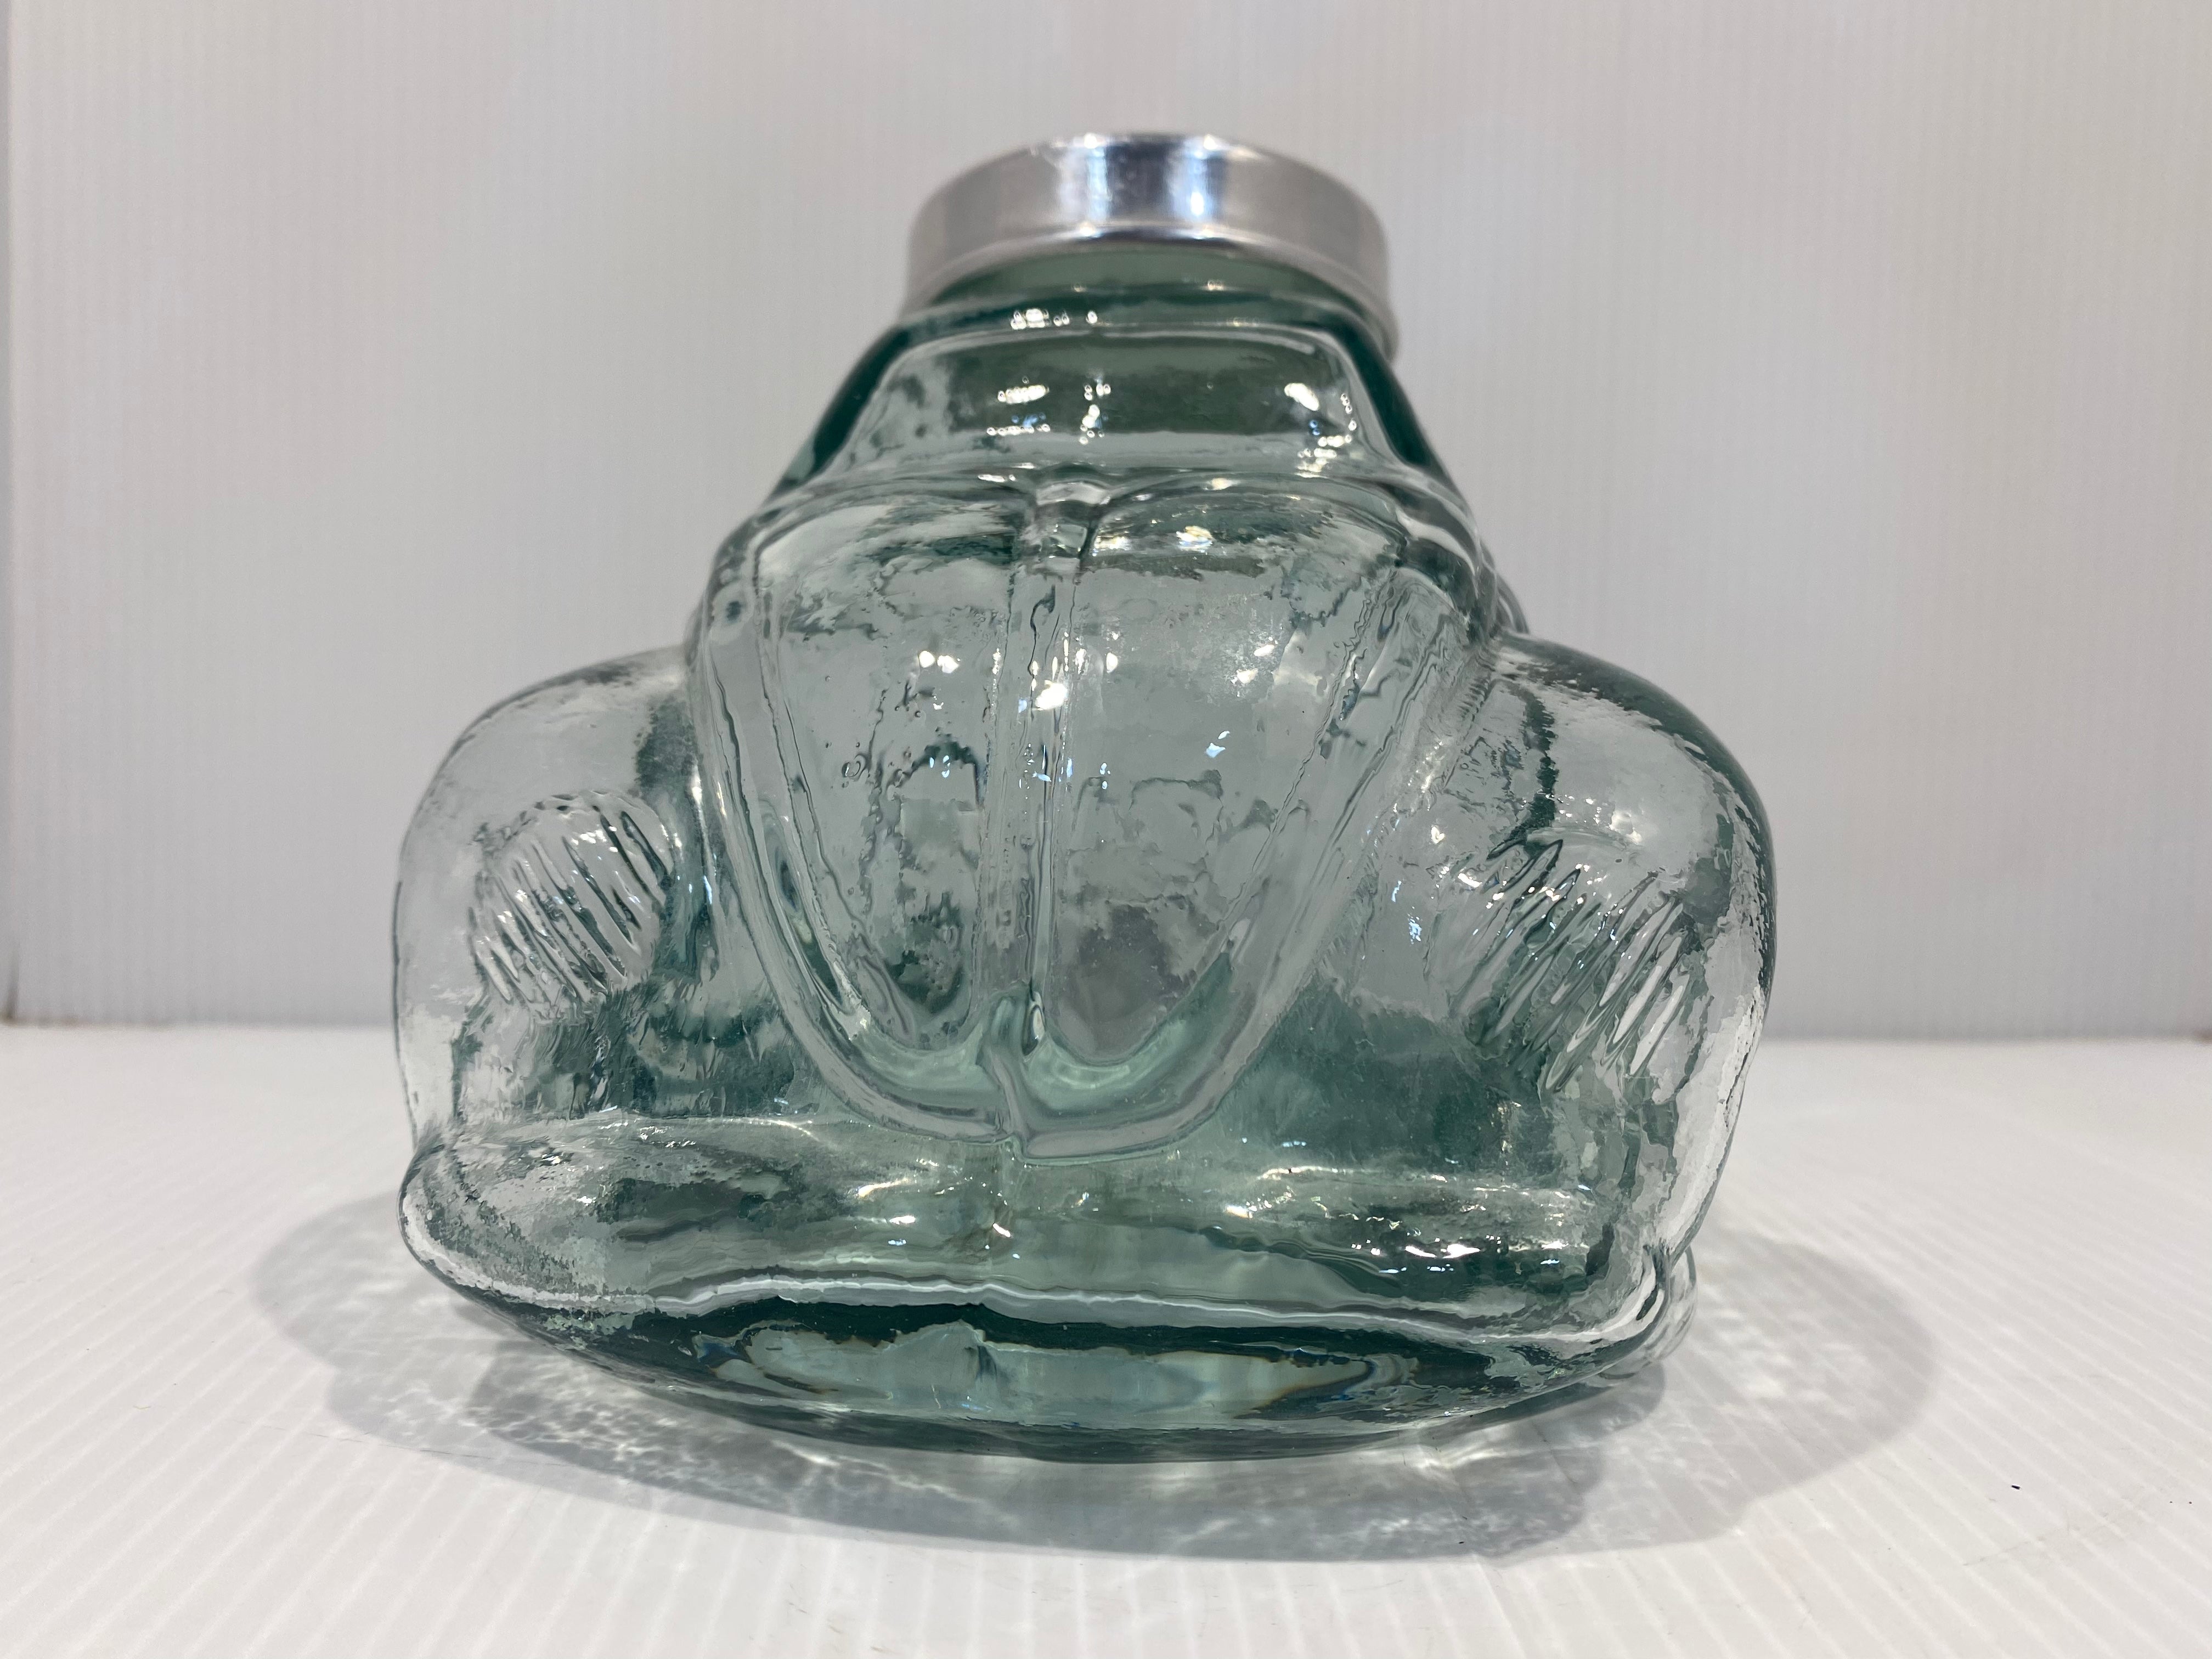 Vintage German Volkswagen glass candy containers. 1960s